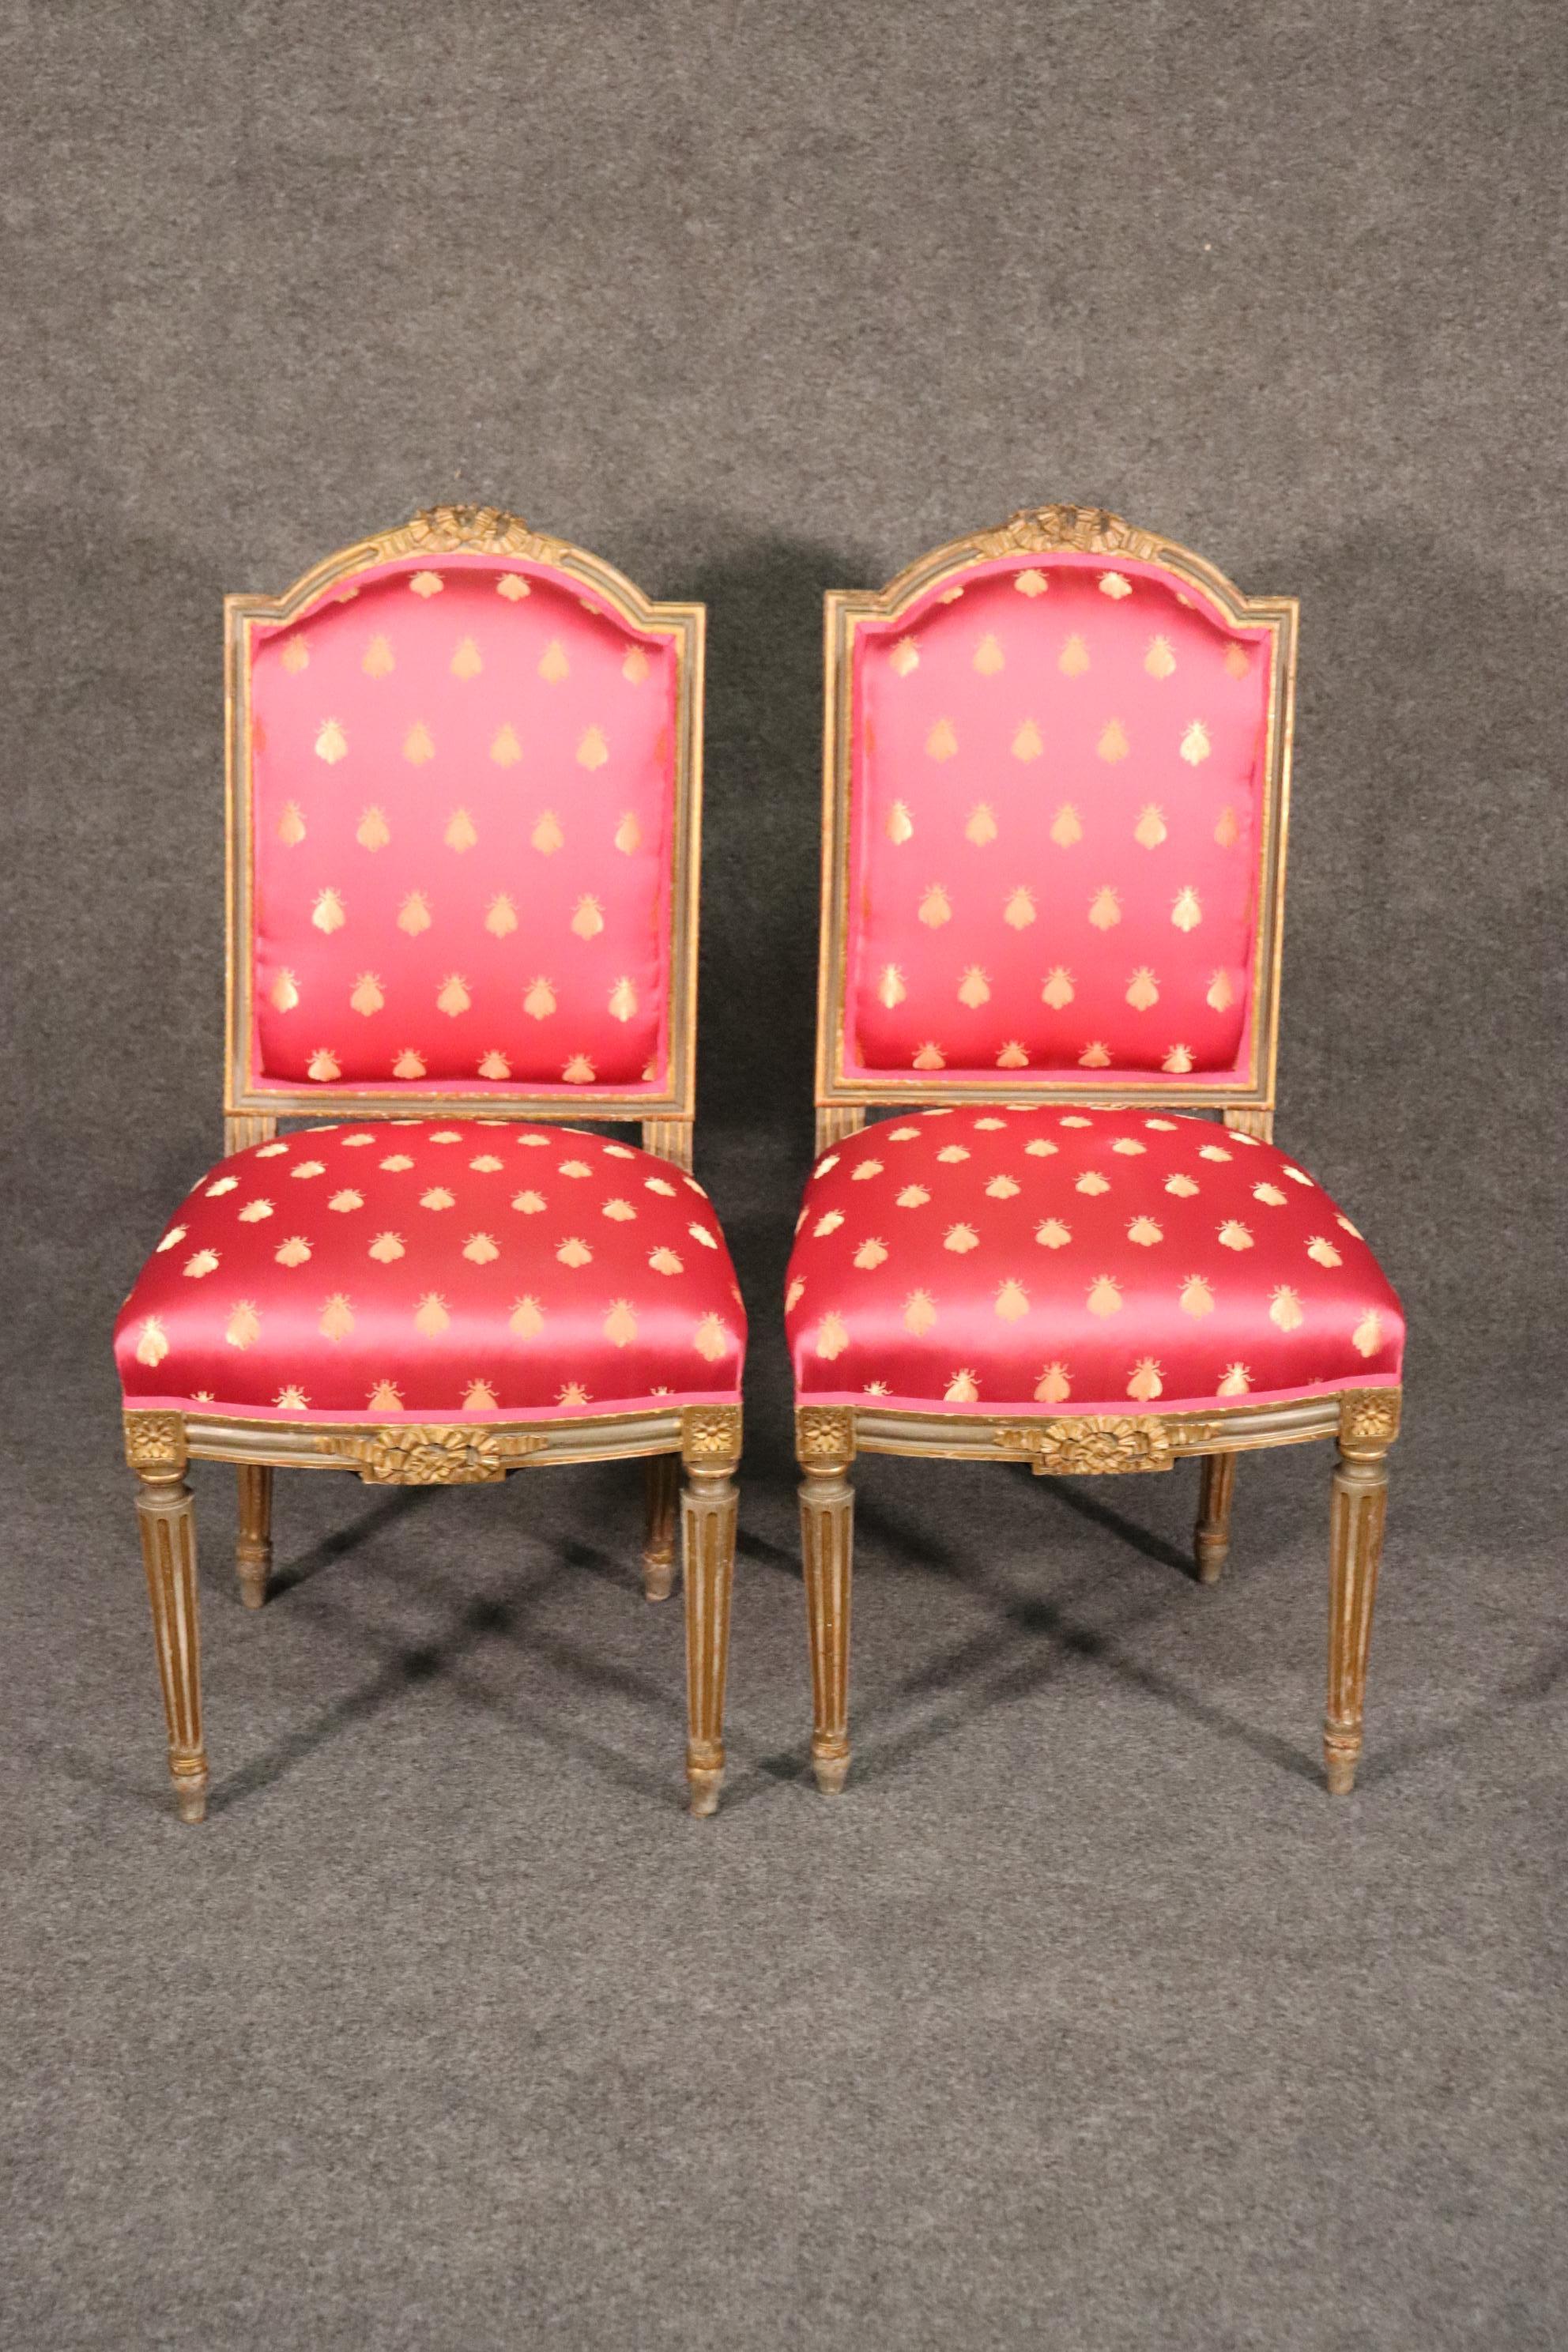 Pair Antique French Louis XVI Painted and Gilded Side Chairs, Circa 1900 In Good Condition For Sale In Swedesboro, NJ